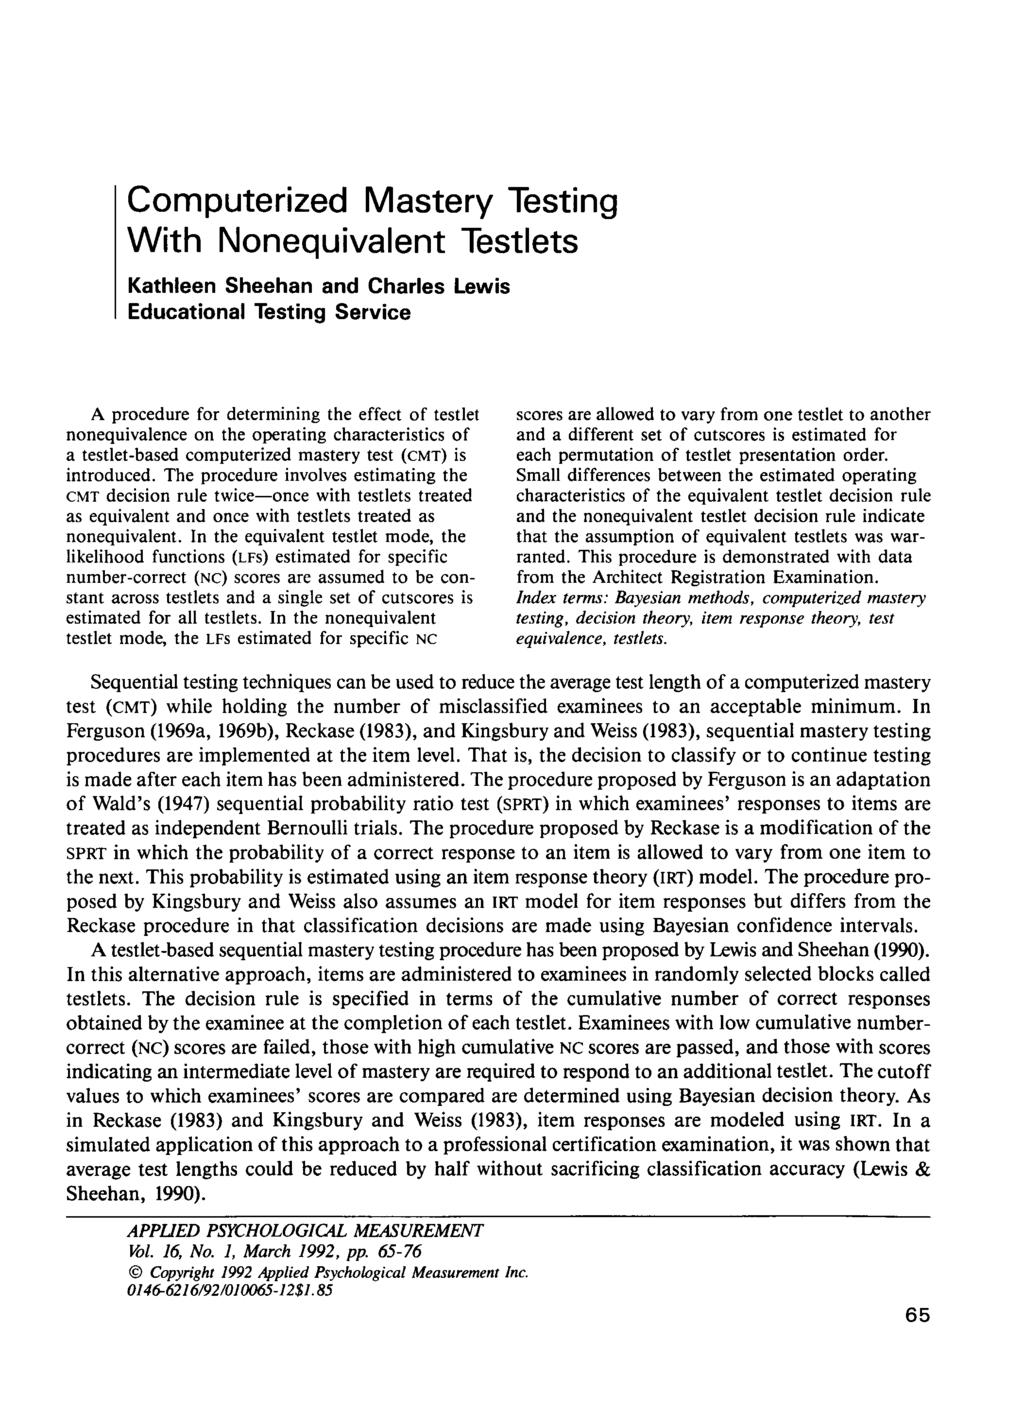 Computerized Mastery Testing With Nonequivalent Testlets Kathleen Sheehan and Charles Lewis Educational Testing Service A procedure for determining the effect of testlet nonequivalence on the